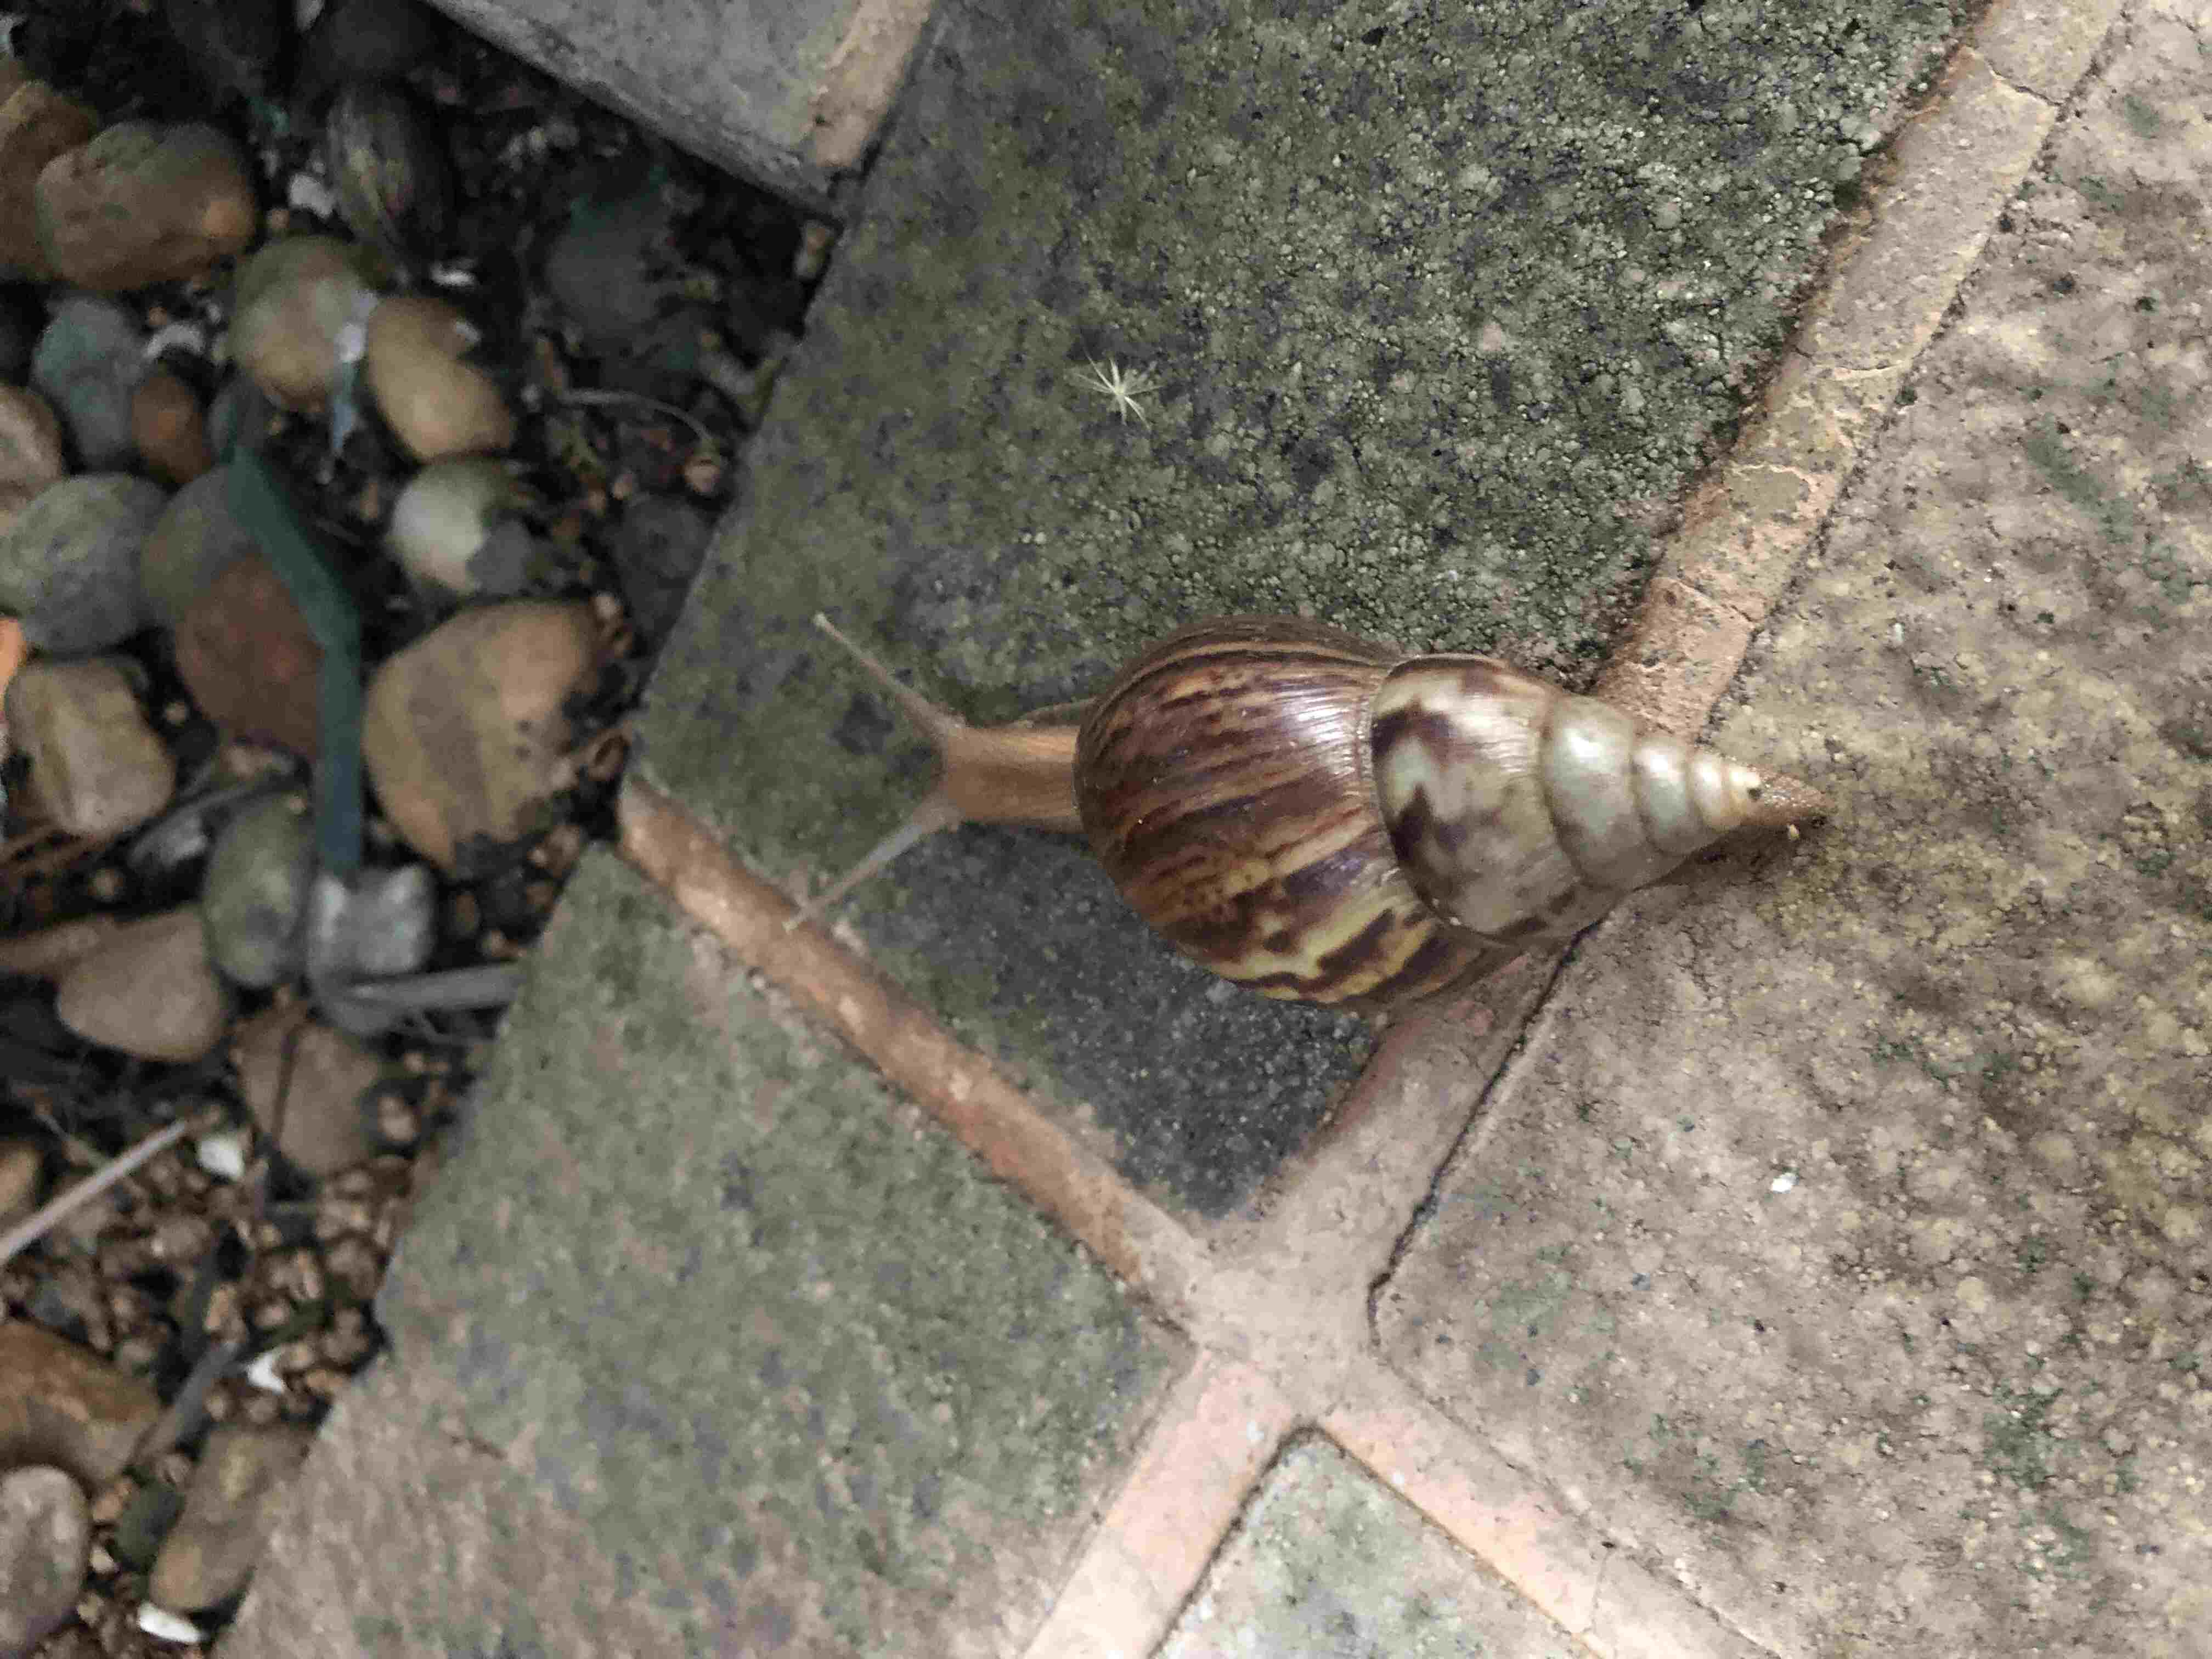 A snail that commonly appears after rainfall